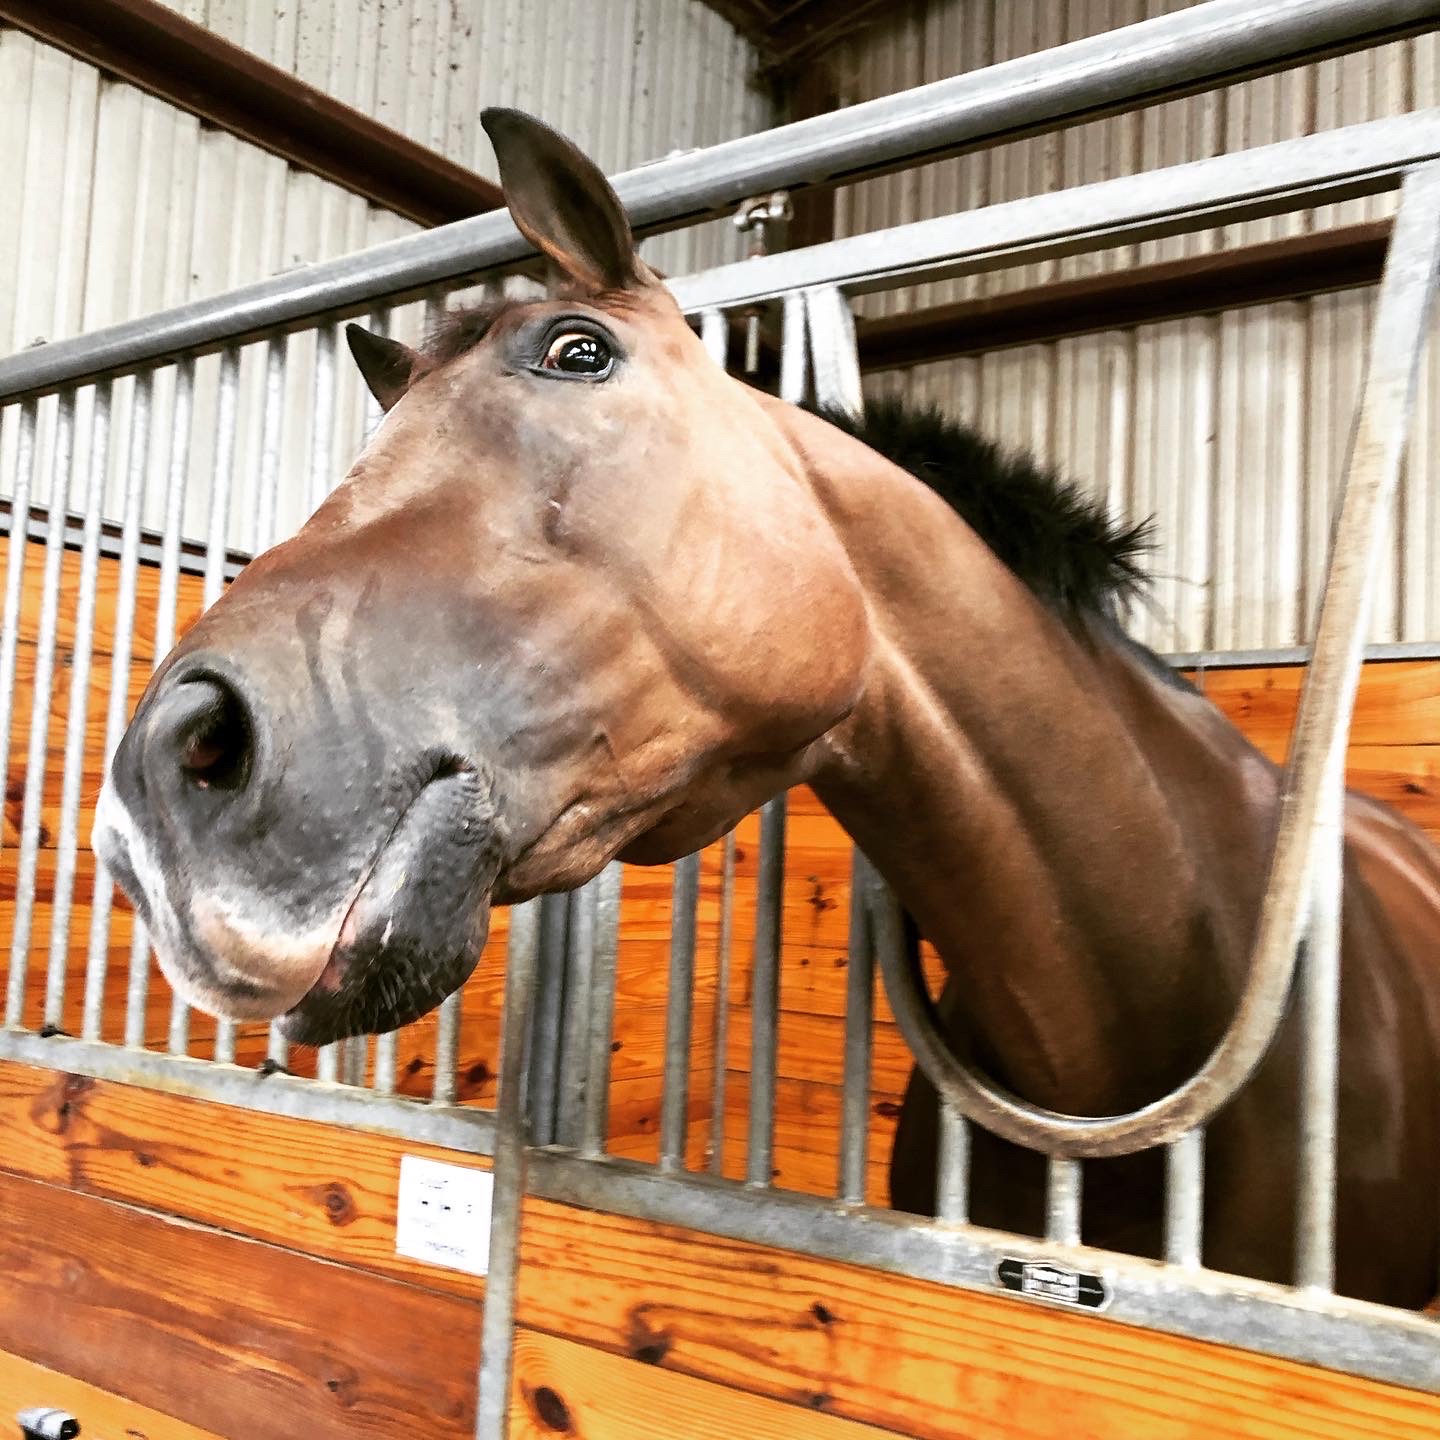 A bay Thoroughbred making a silly face as he pokes his head out of his stall window.